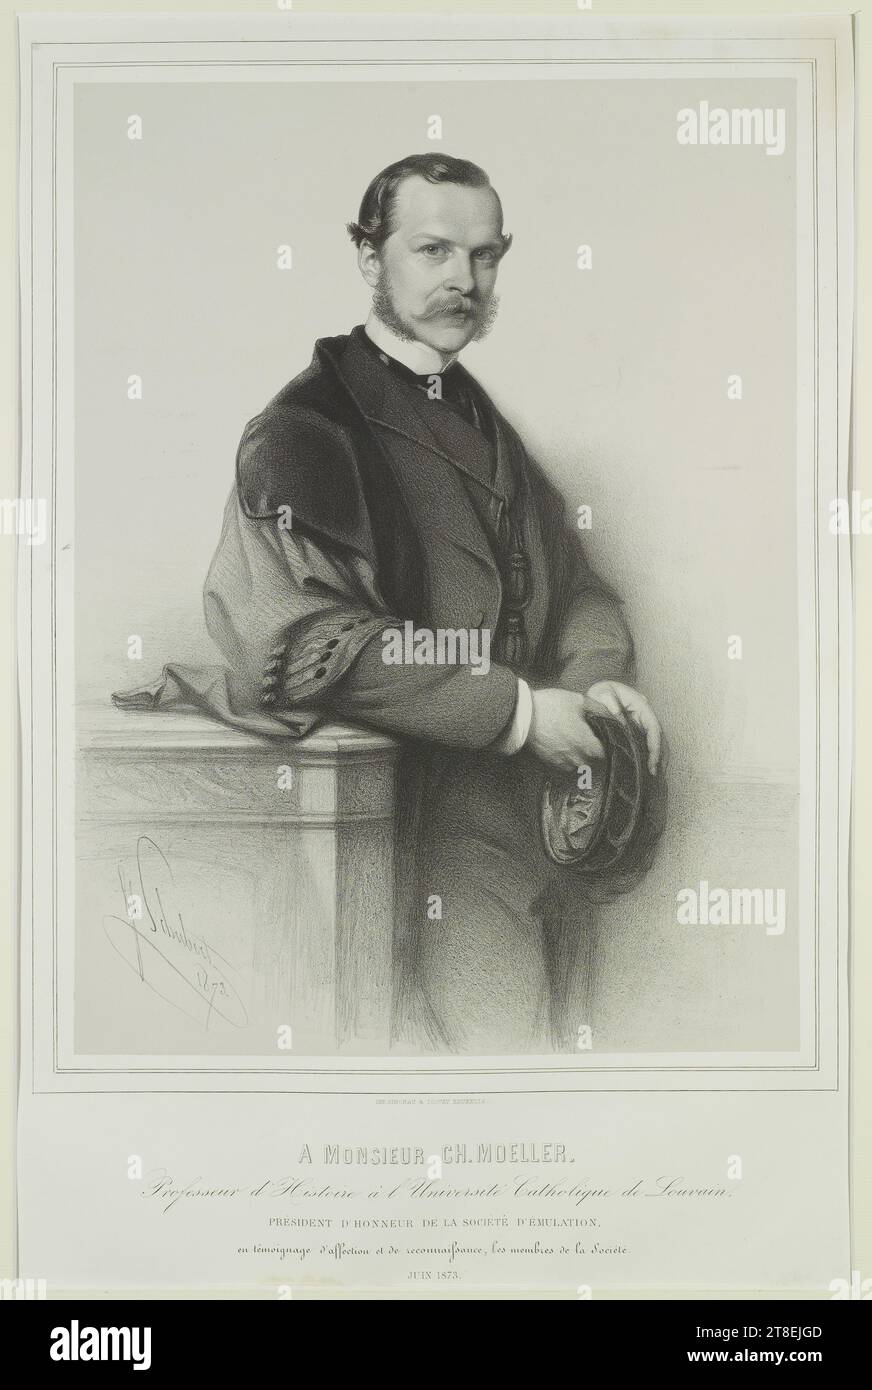 Jh Schubert 1873. IMP. SIMONAU & TOOVEY, BRUSSELS. A. MR. CH. MOELLER, Professor of History at the Catholic University of Louvain, HONORARY PRESIDENT OF THE EMULATION SOCIETY, as a token of affection and gratitude, the members of the Society. JUNE 1873 Stock Photo